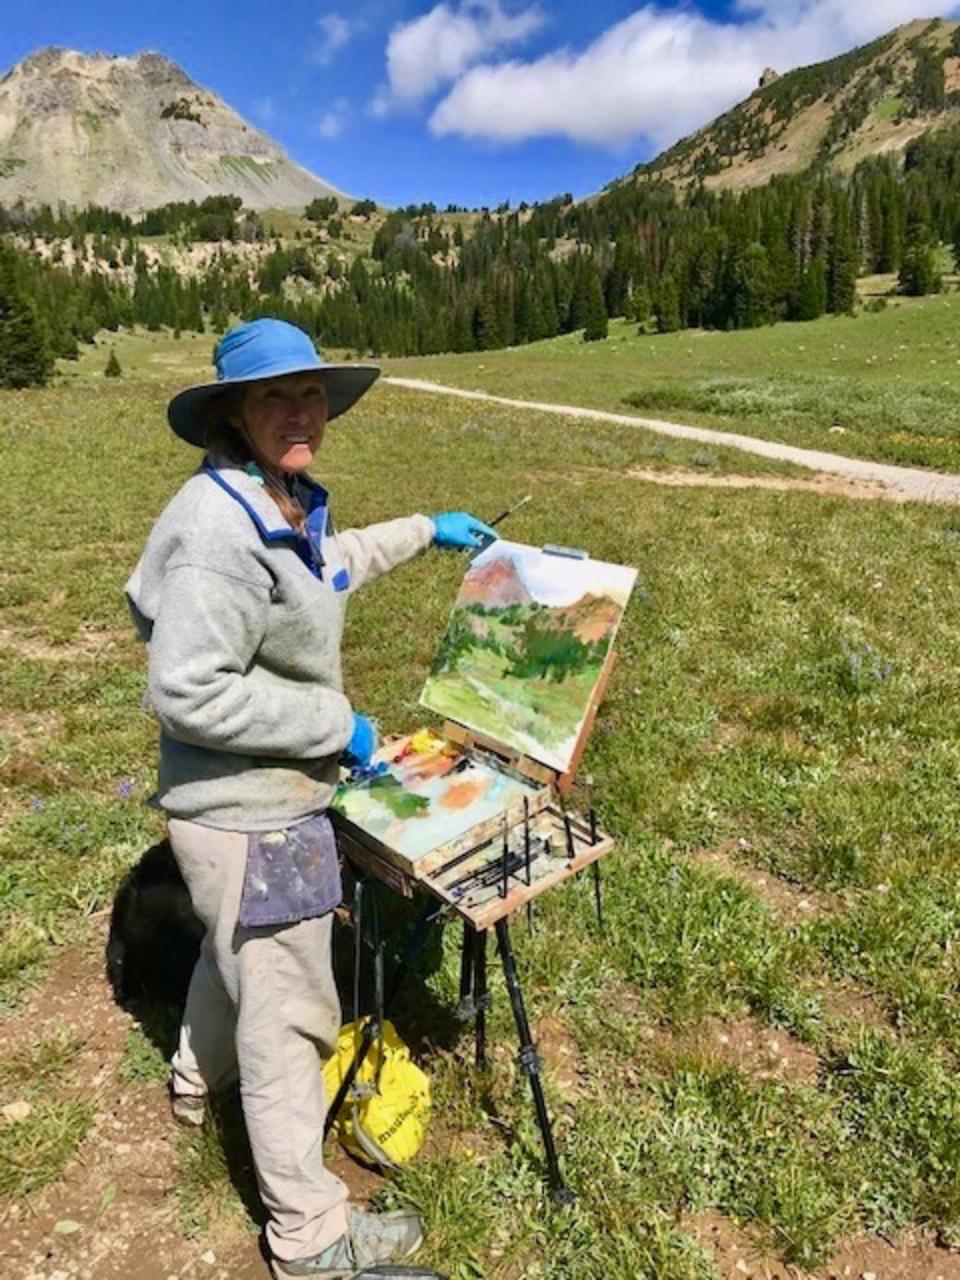 The conservationist/fine artist painting the restored mountain meadows in the once-toxic New World Mining District.